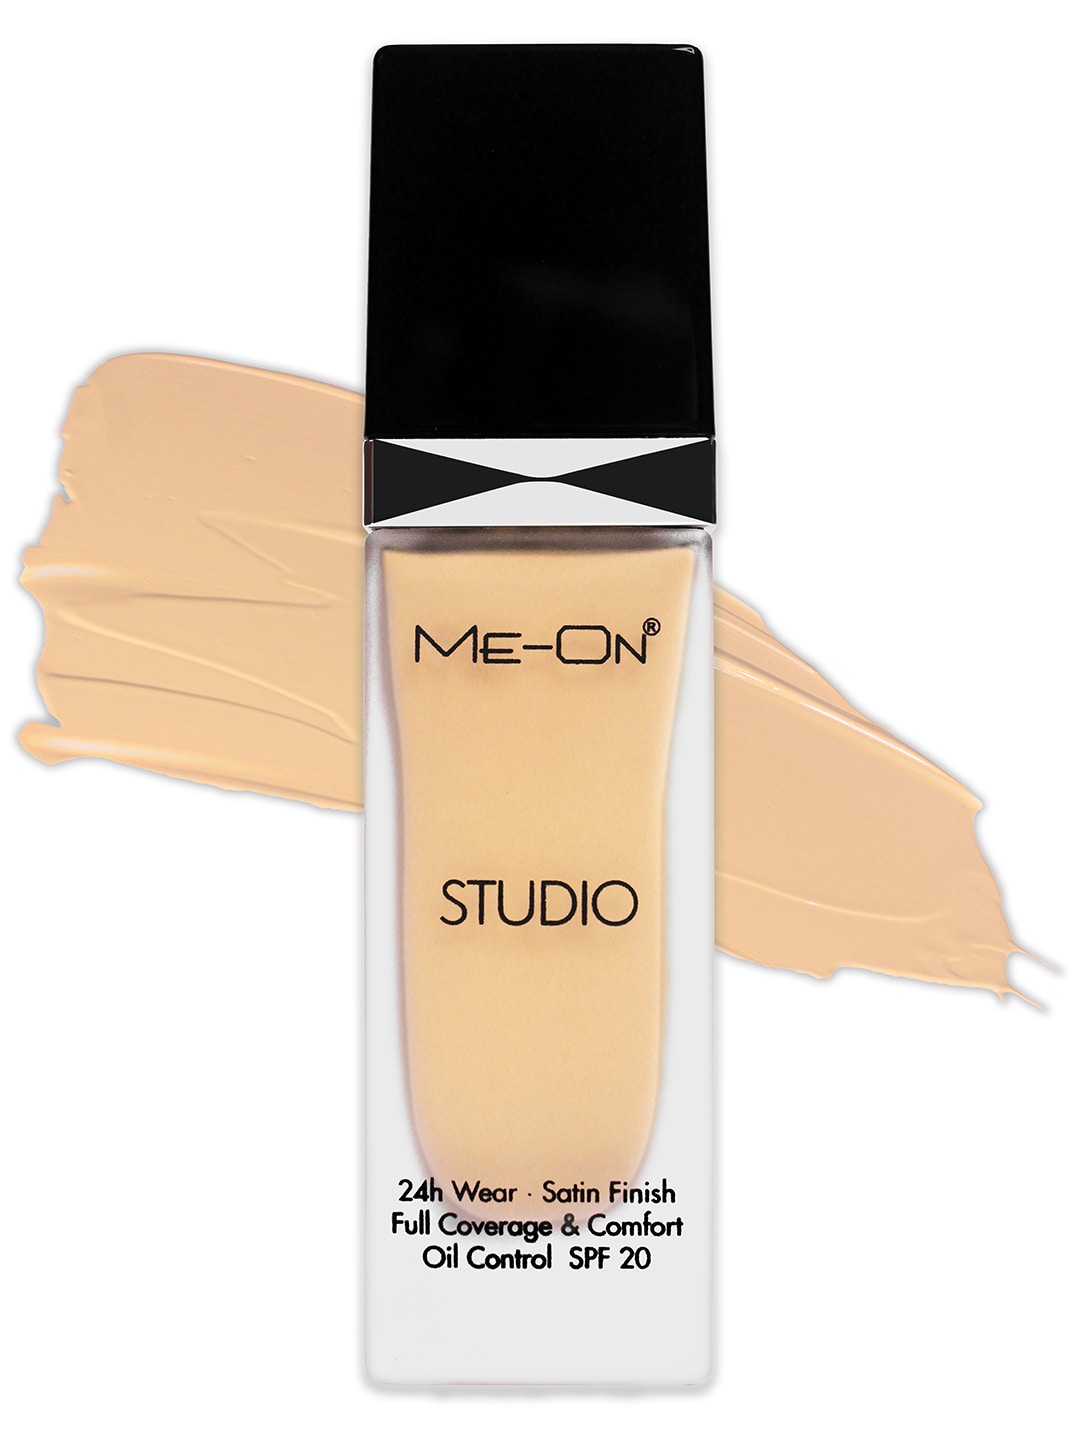 ME-ON Studio Foundation - Shade 01 Price in India